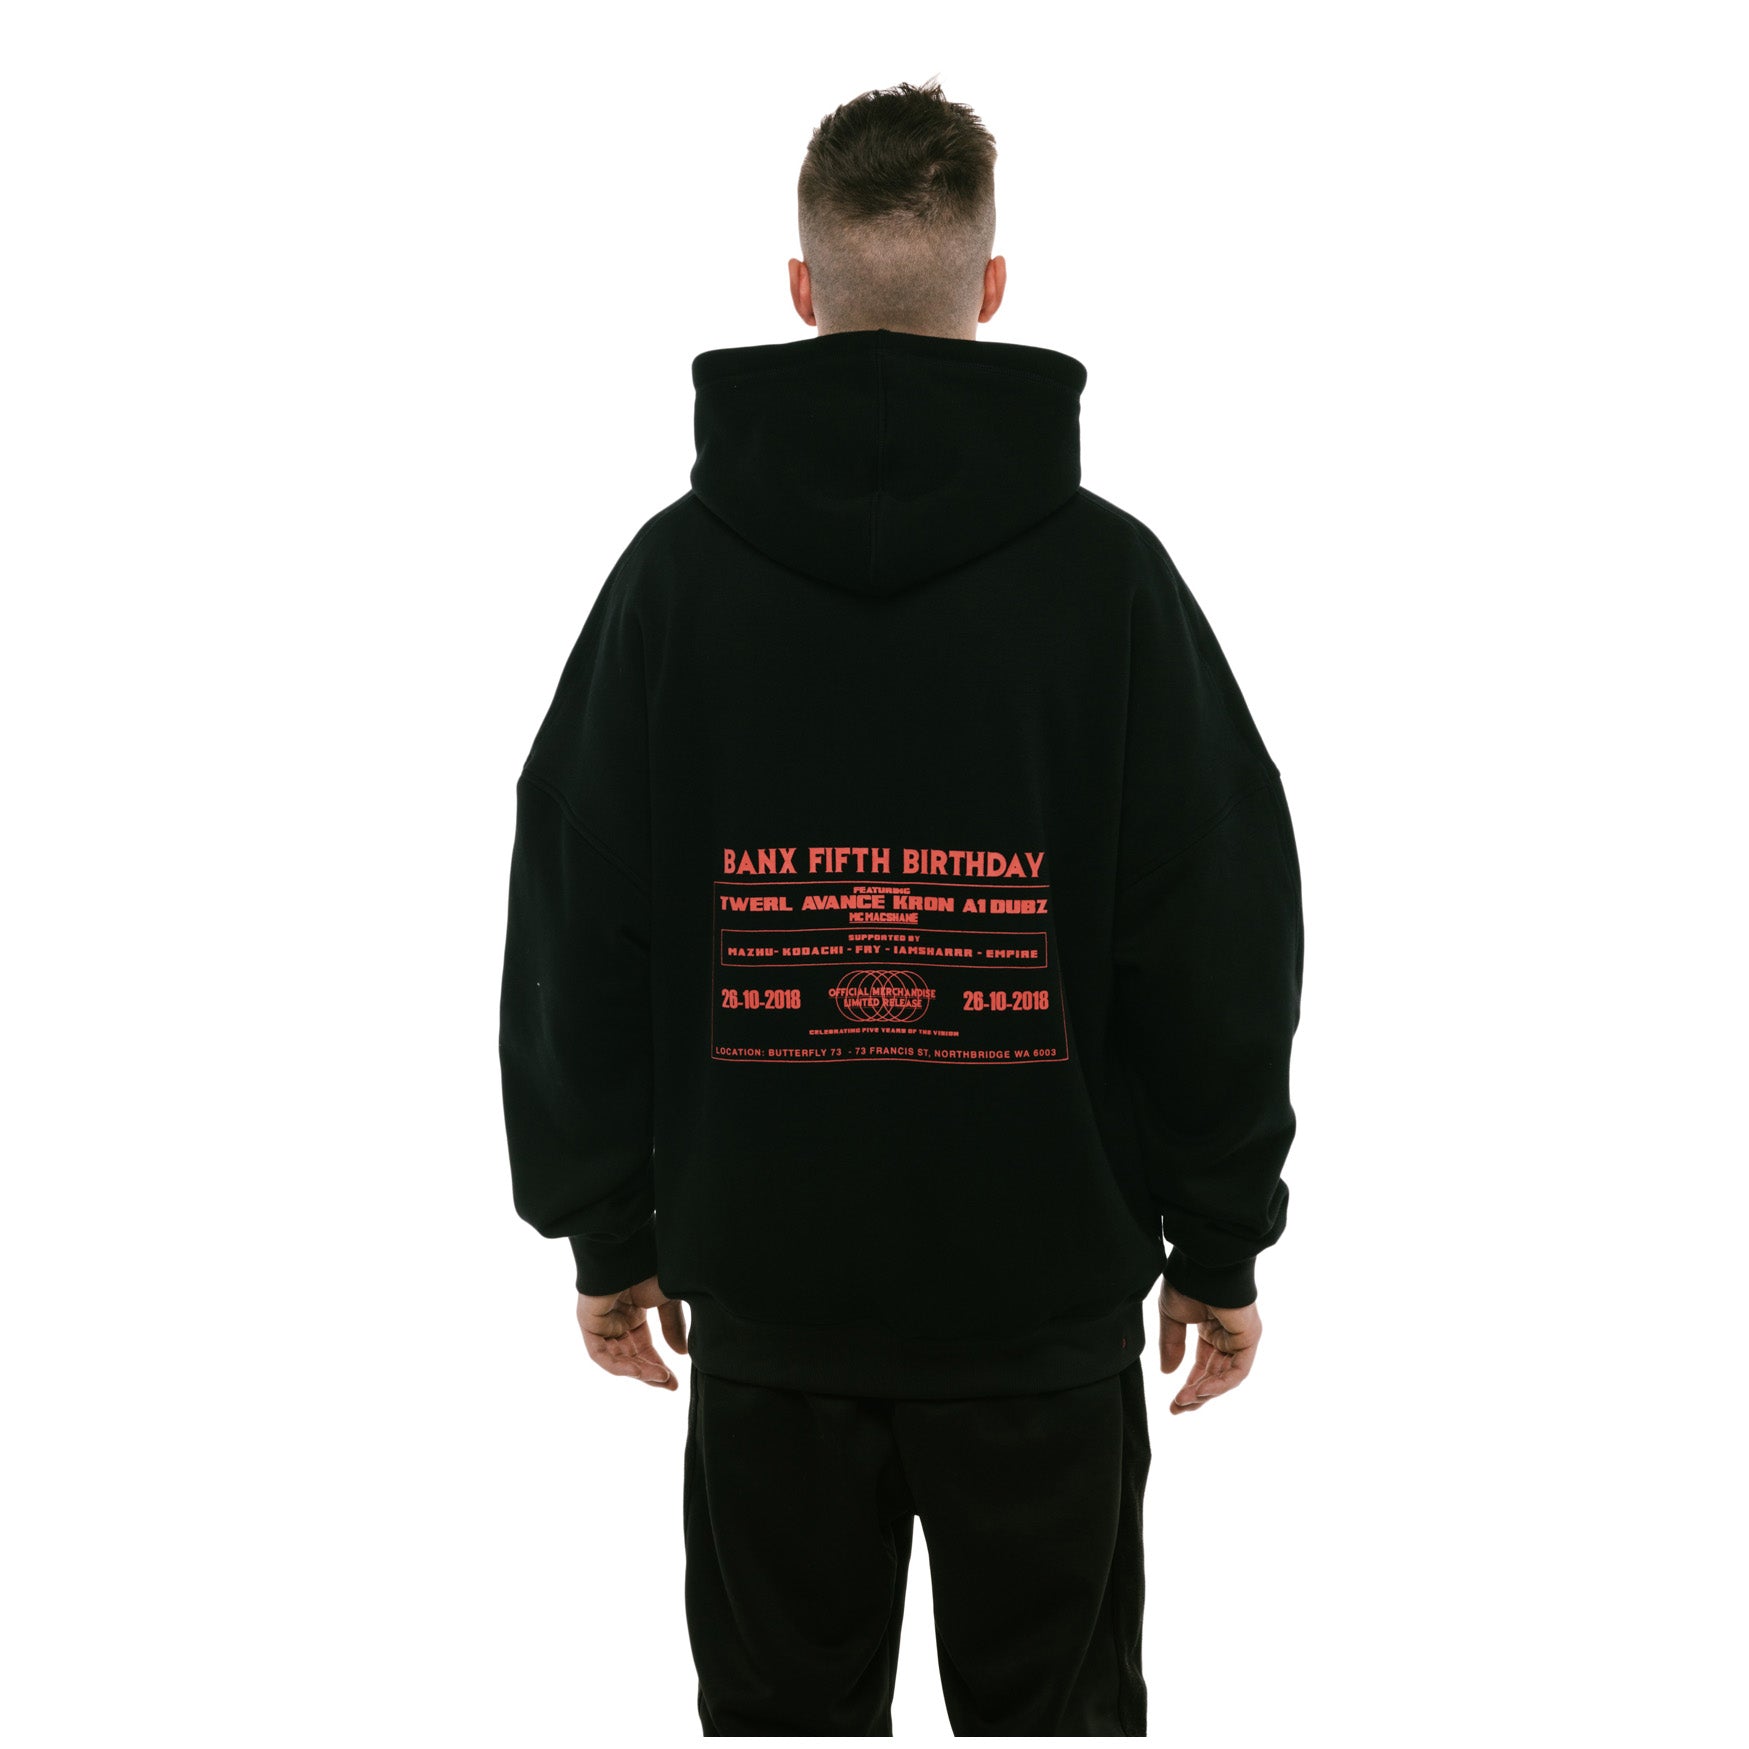 “FIVE YEARS OF THE VISION” Oversized Hoodie